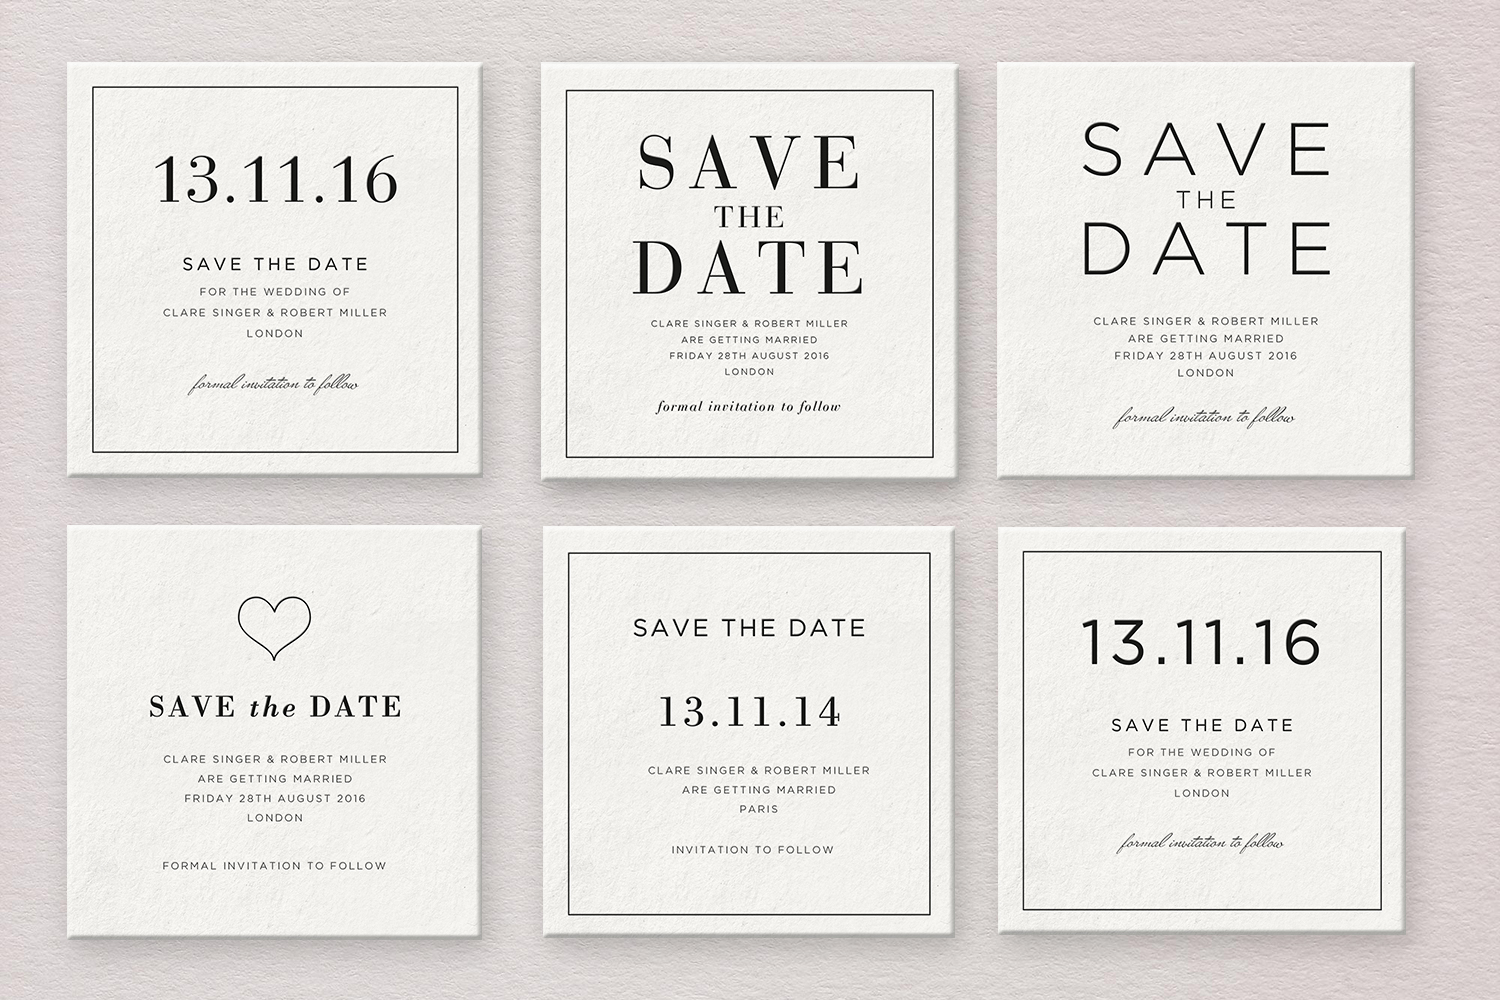 SAVE-THE-DATE-STYLES.jpg